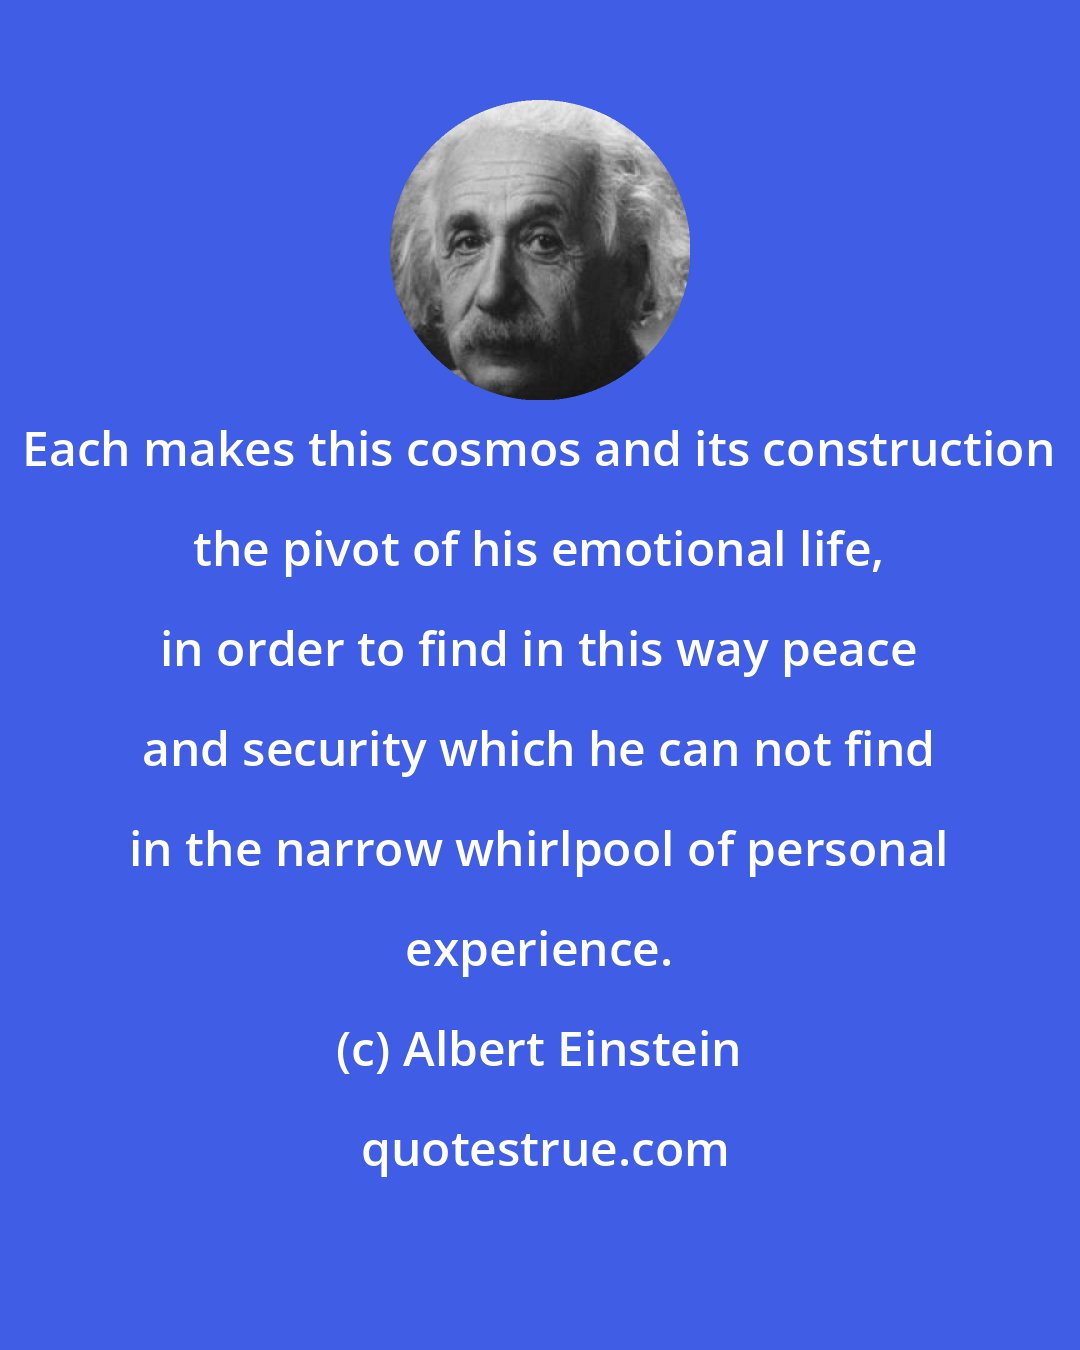 Albert Einstein: Each makes this cosmos and its construction the pivot of his emotional life, in order to find in this way peace and security which he can not find in the narrow whirlpool of personal experience.